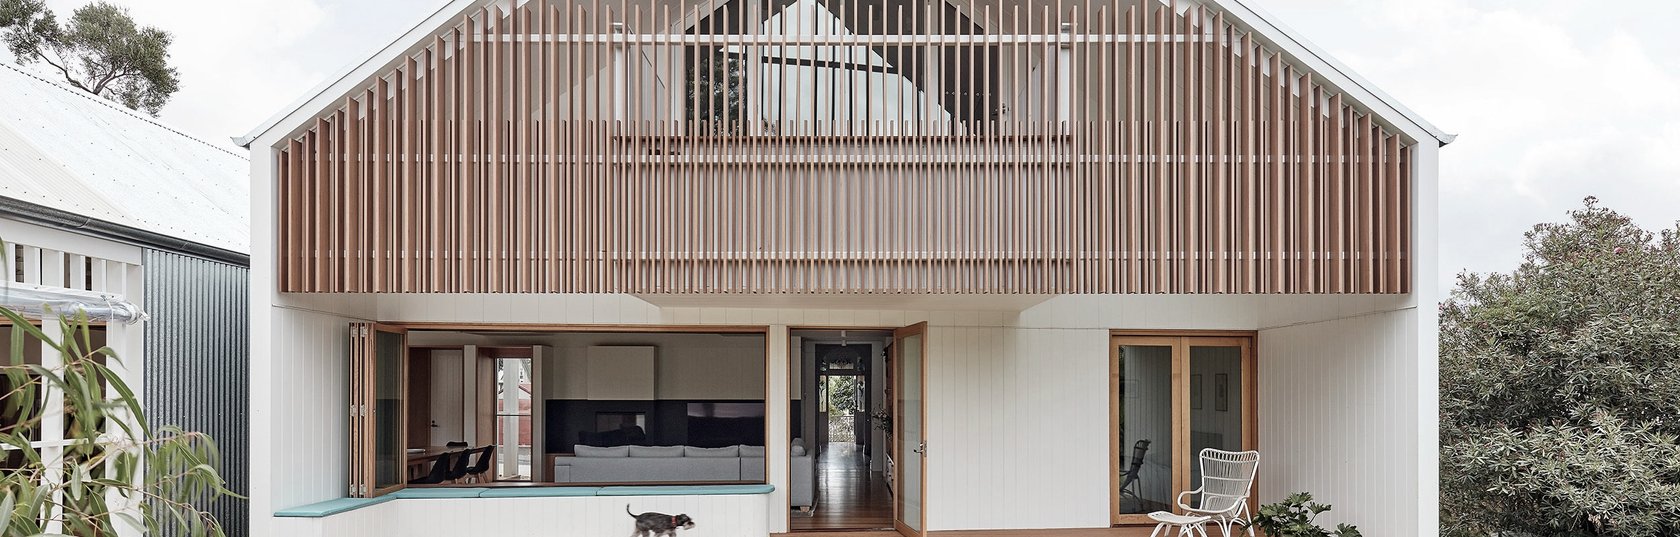 An Edwardian homestead enters the new millennium with a strategic extension